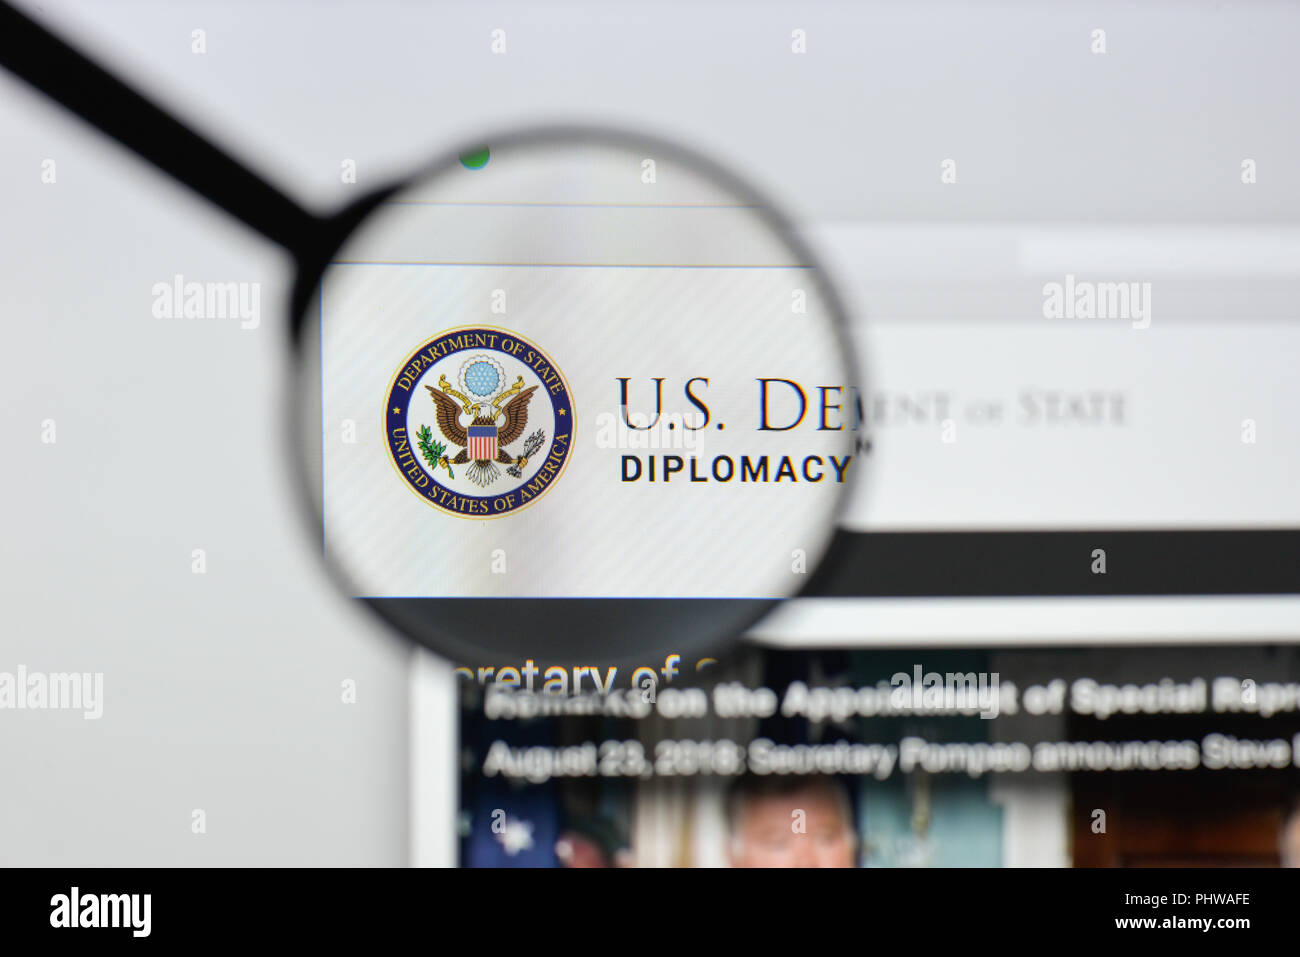 Milan, Italy - August 20, 2018: Department of State website homepage. Department of State logo visible. Stock Photo